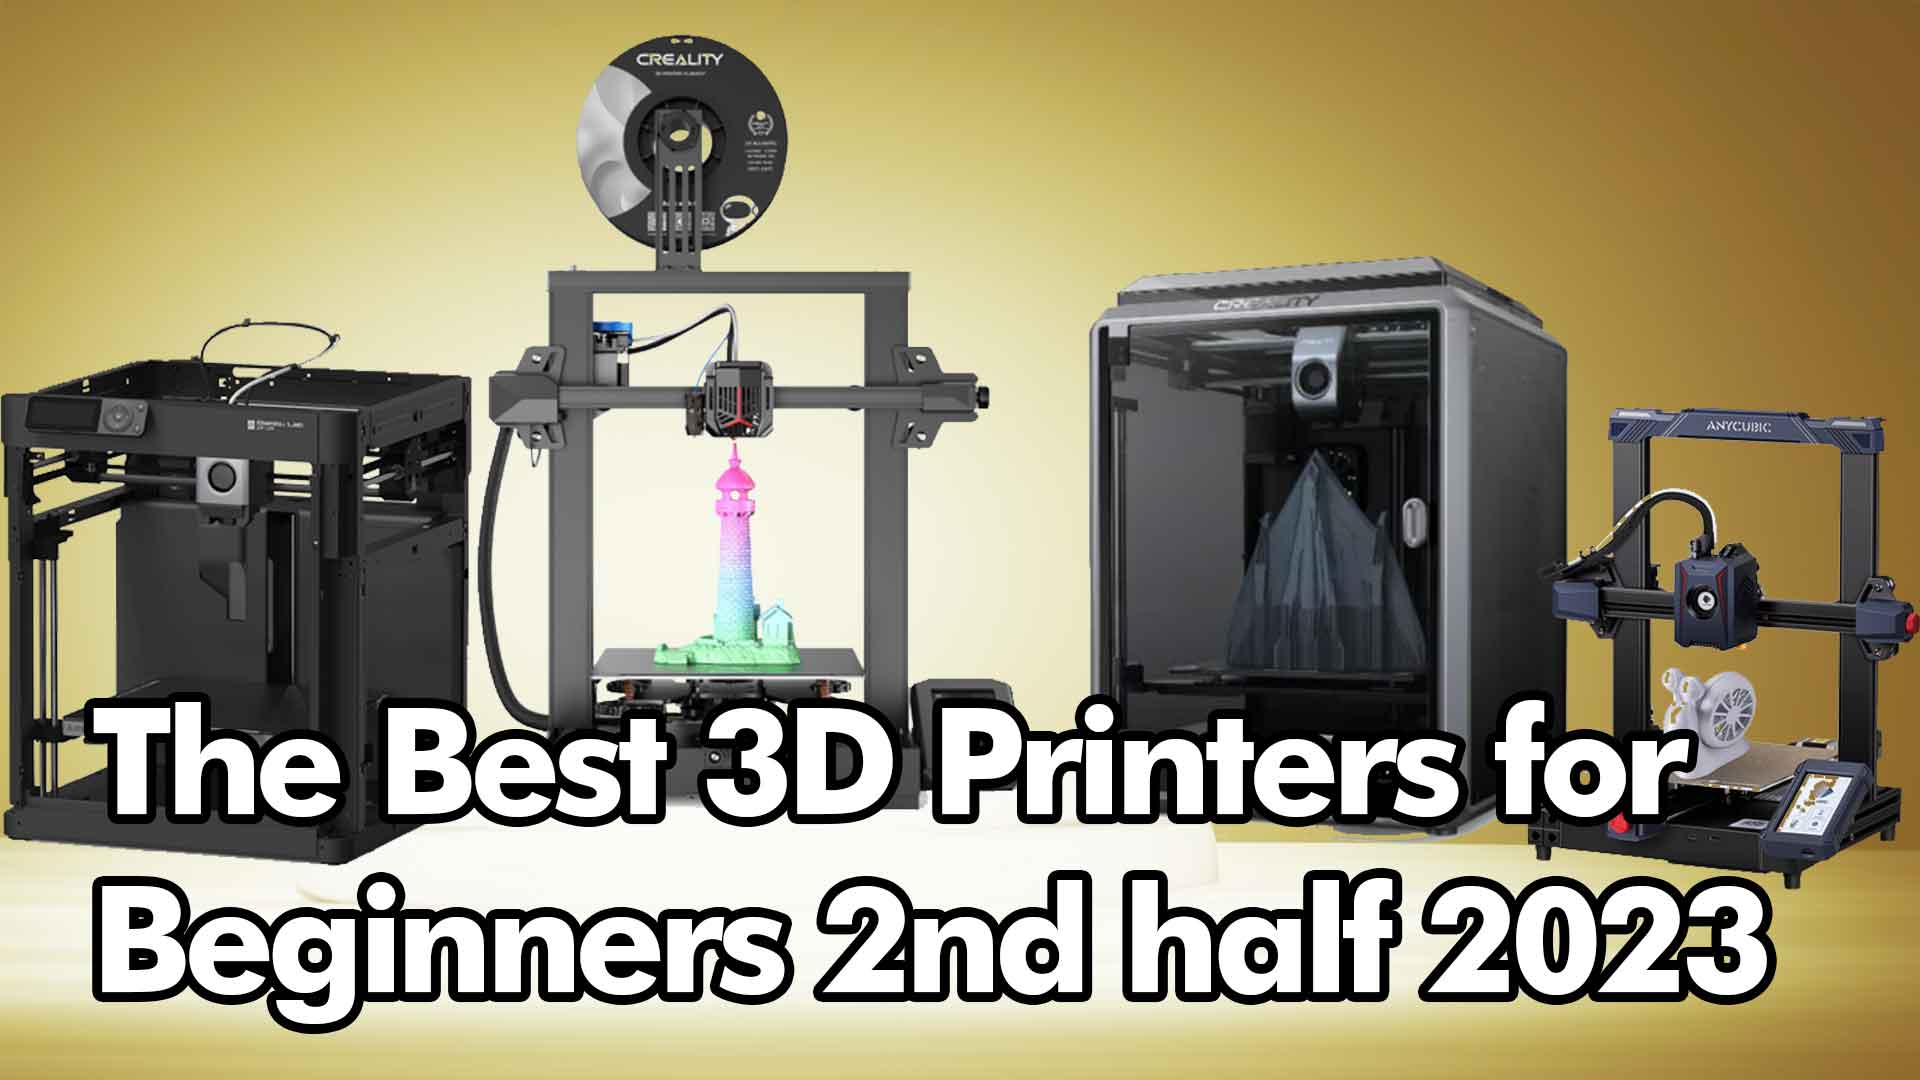 Creality Ender 3 S1 Pro Review - Great 3d Printer for Beginners 